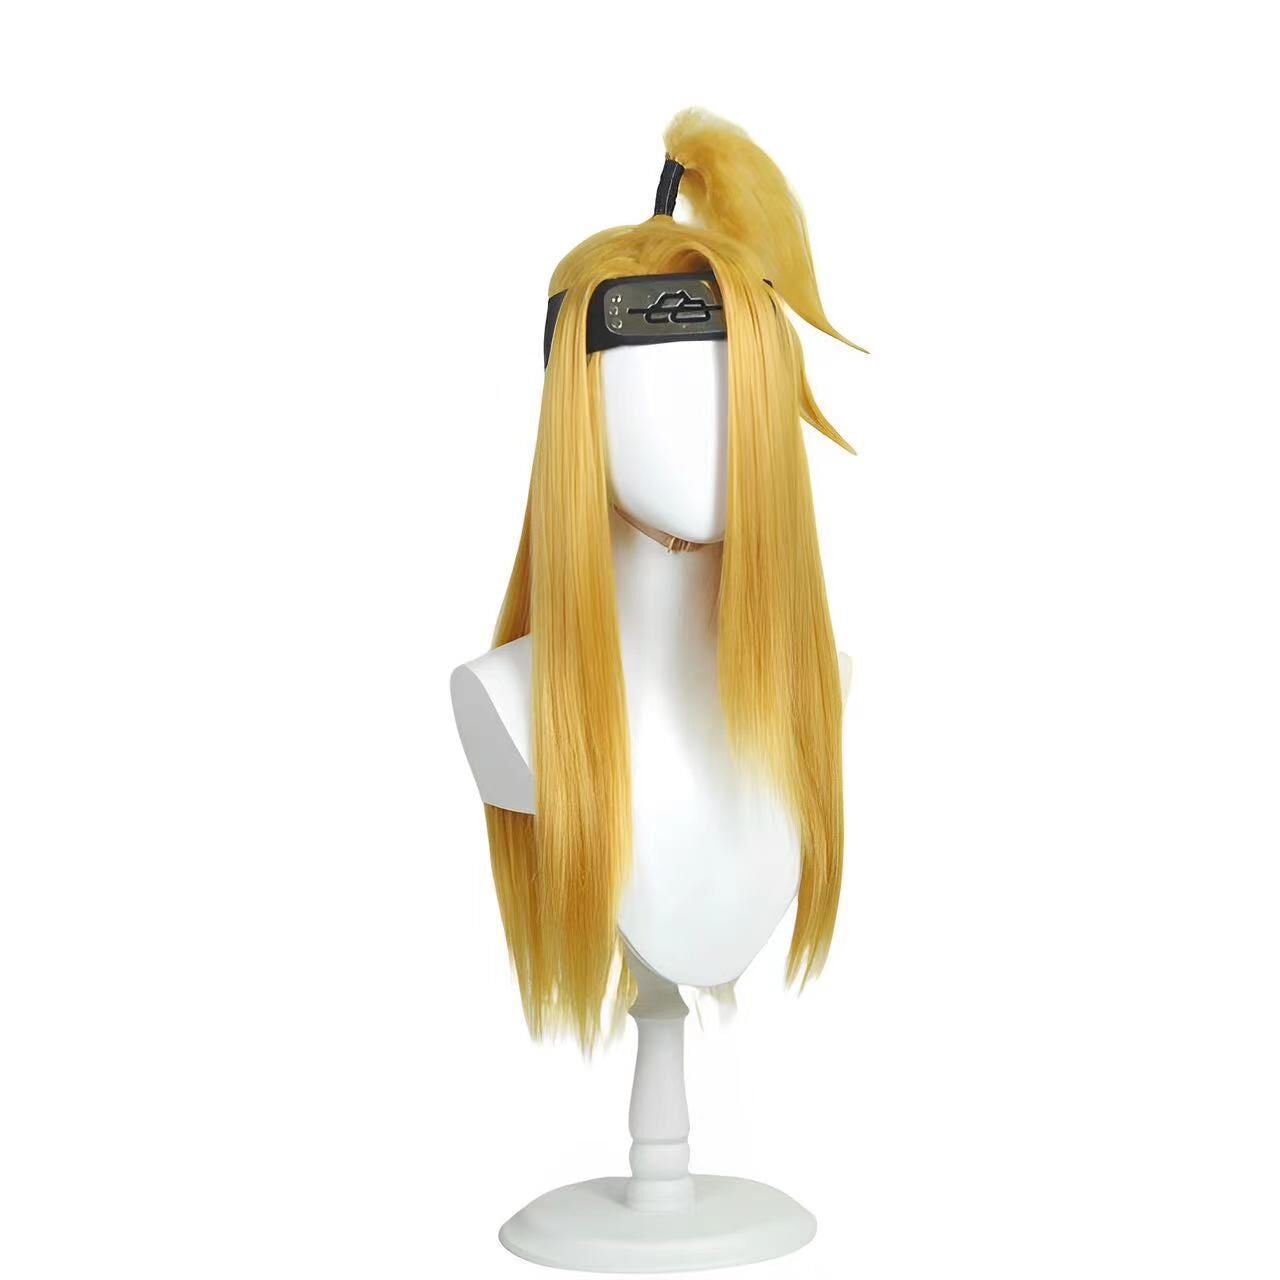 Get Explosively Stylish with the Deidara Cosplay Wig - Naruto Fans Rejoice!